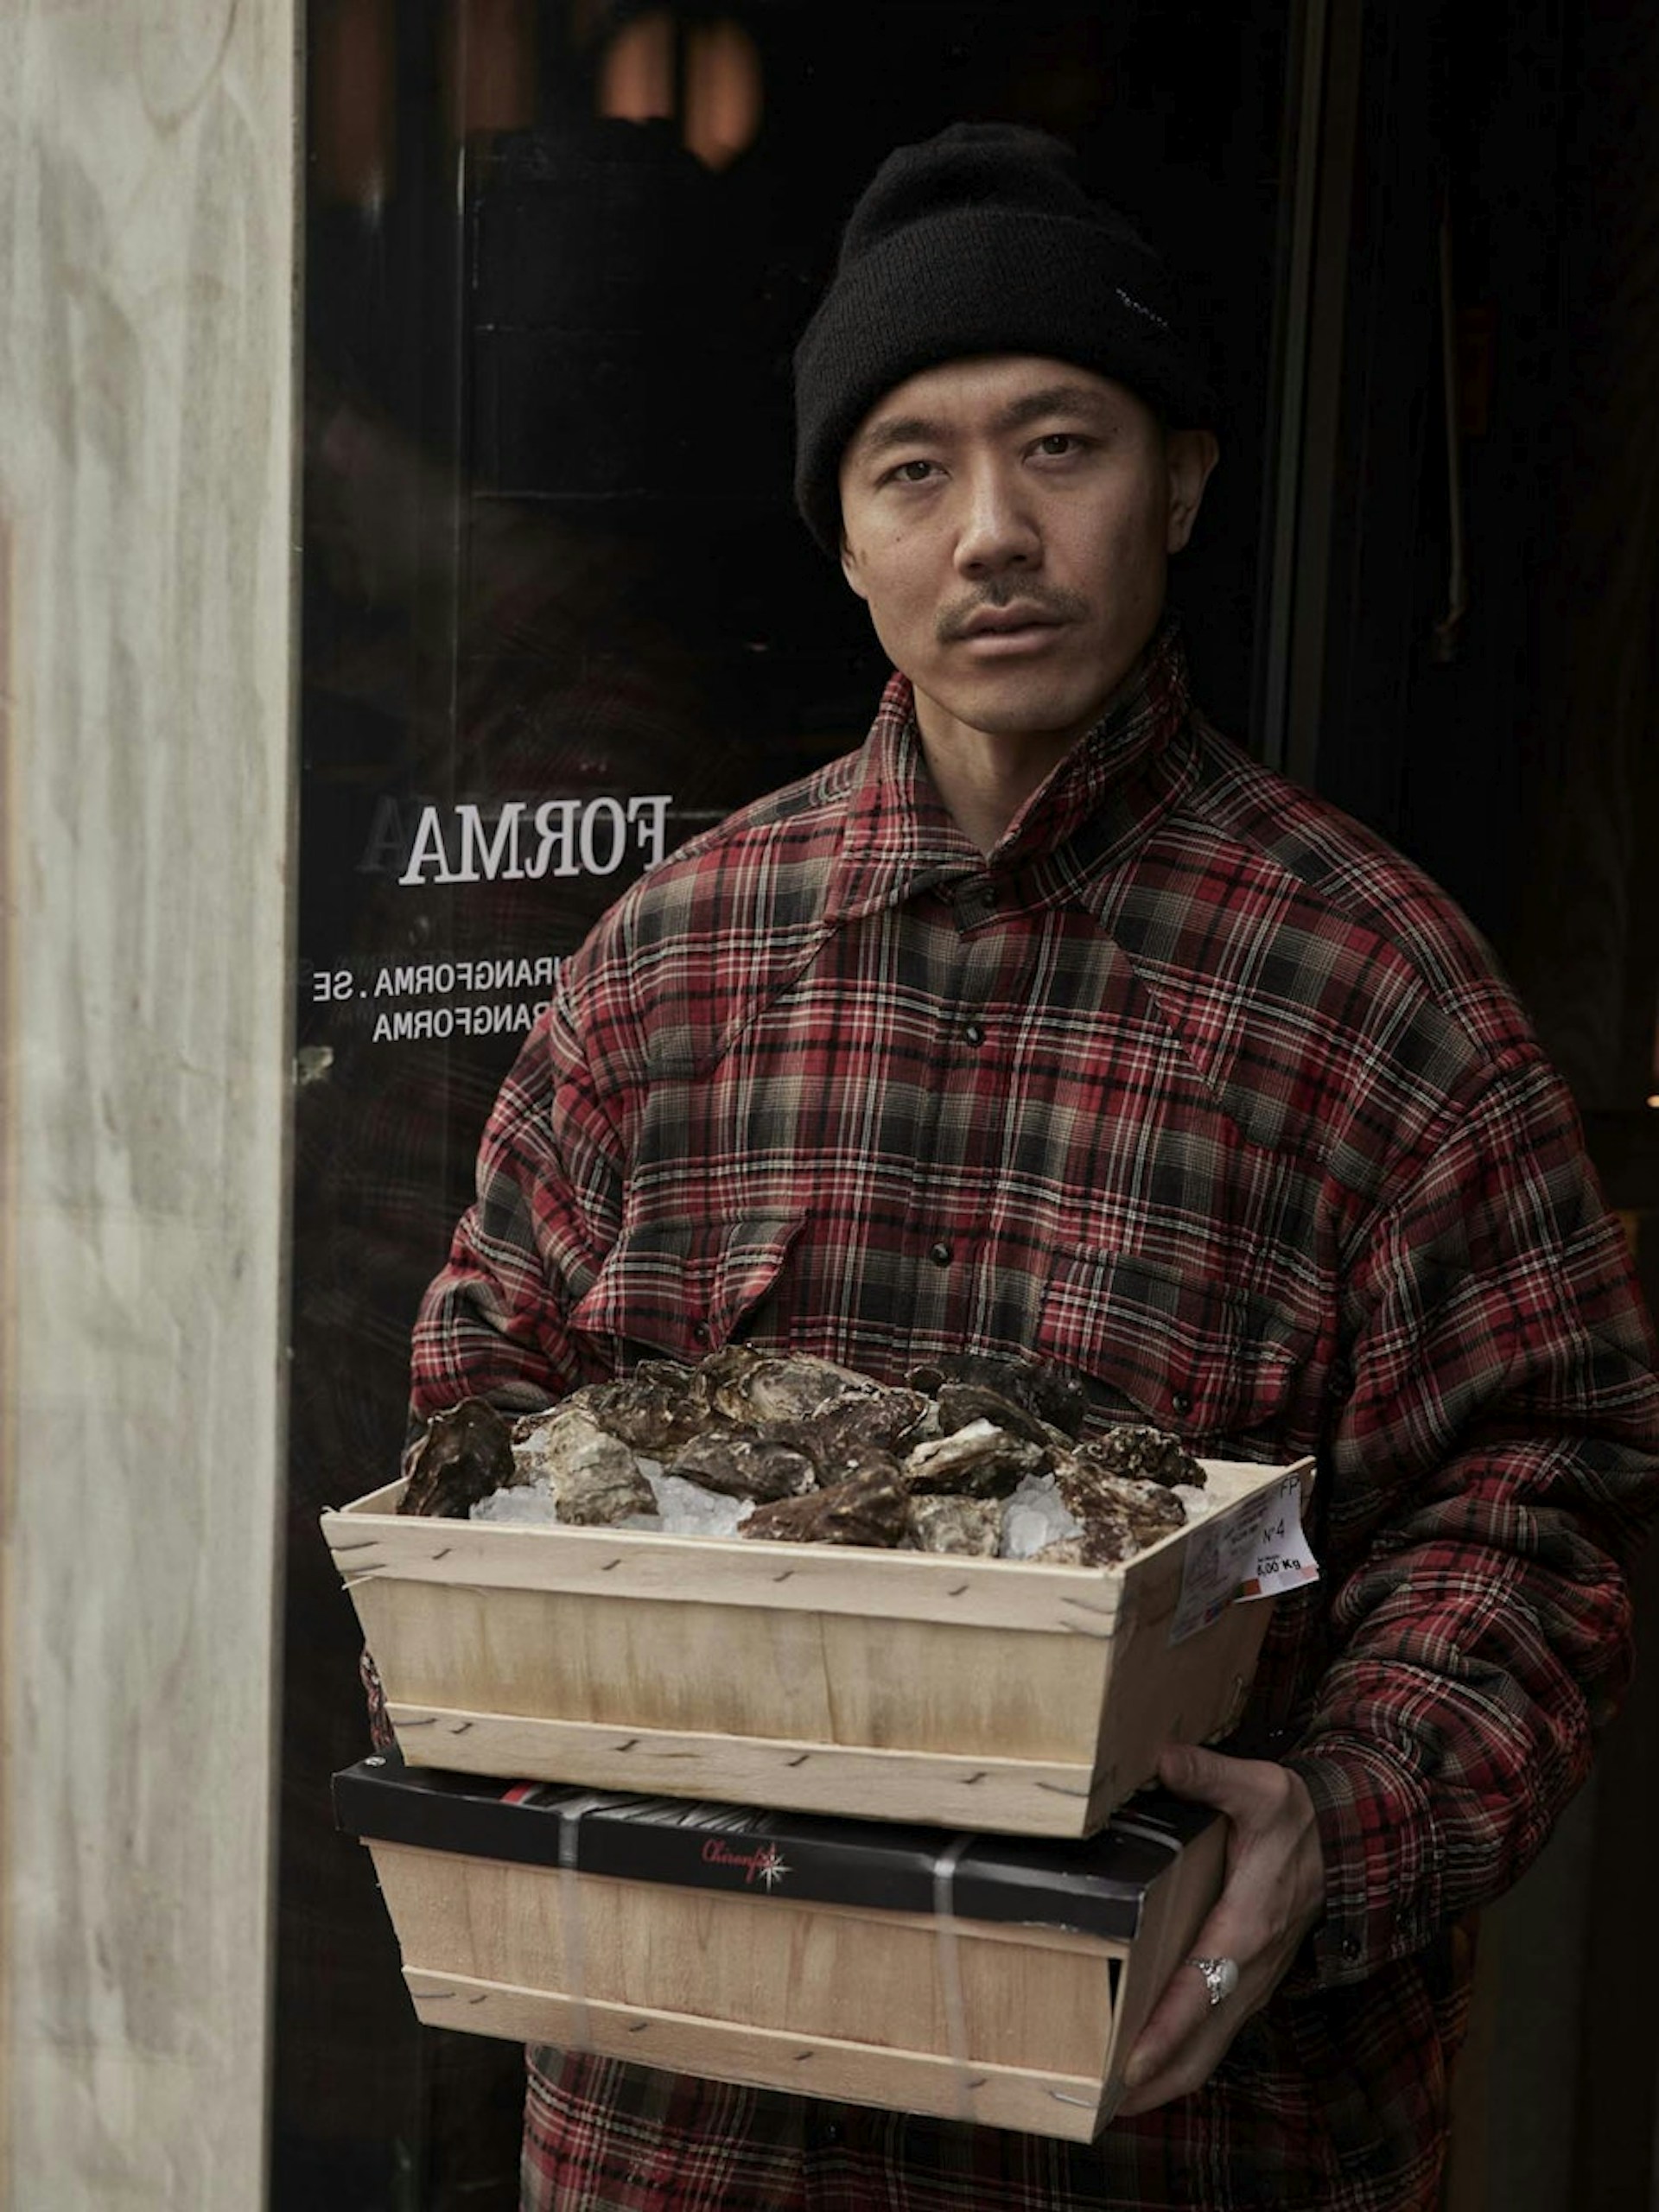 Anton Lindeblad holding two boxes of clams